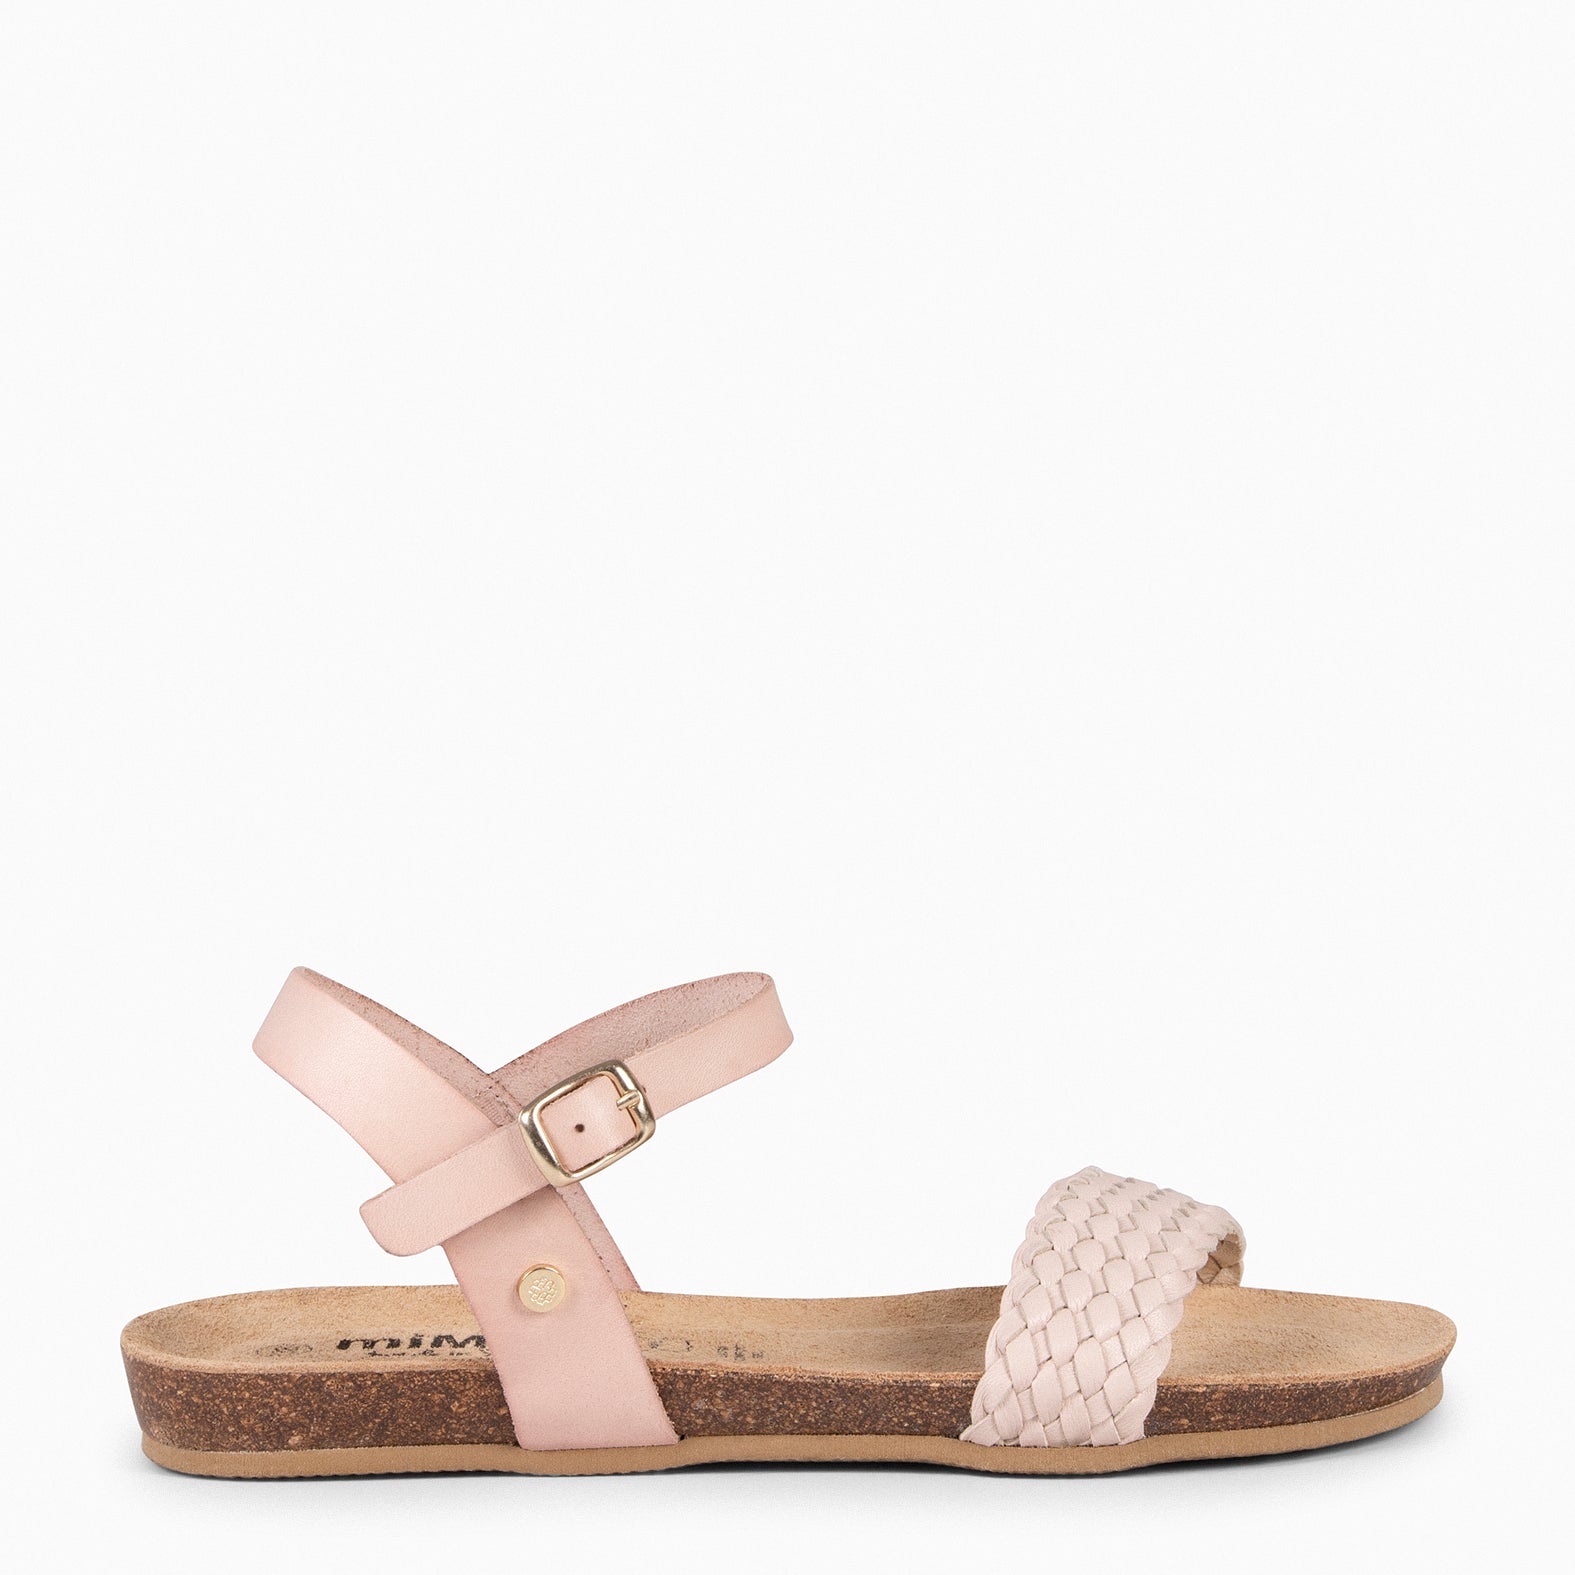 AIRE - NUDE BIO Flat Sandals with braided strap